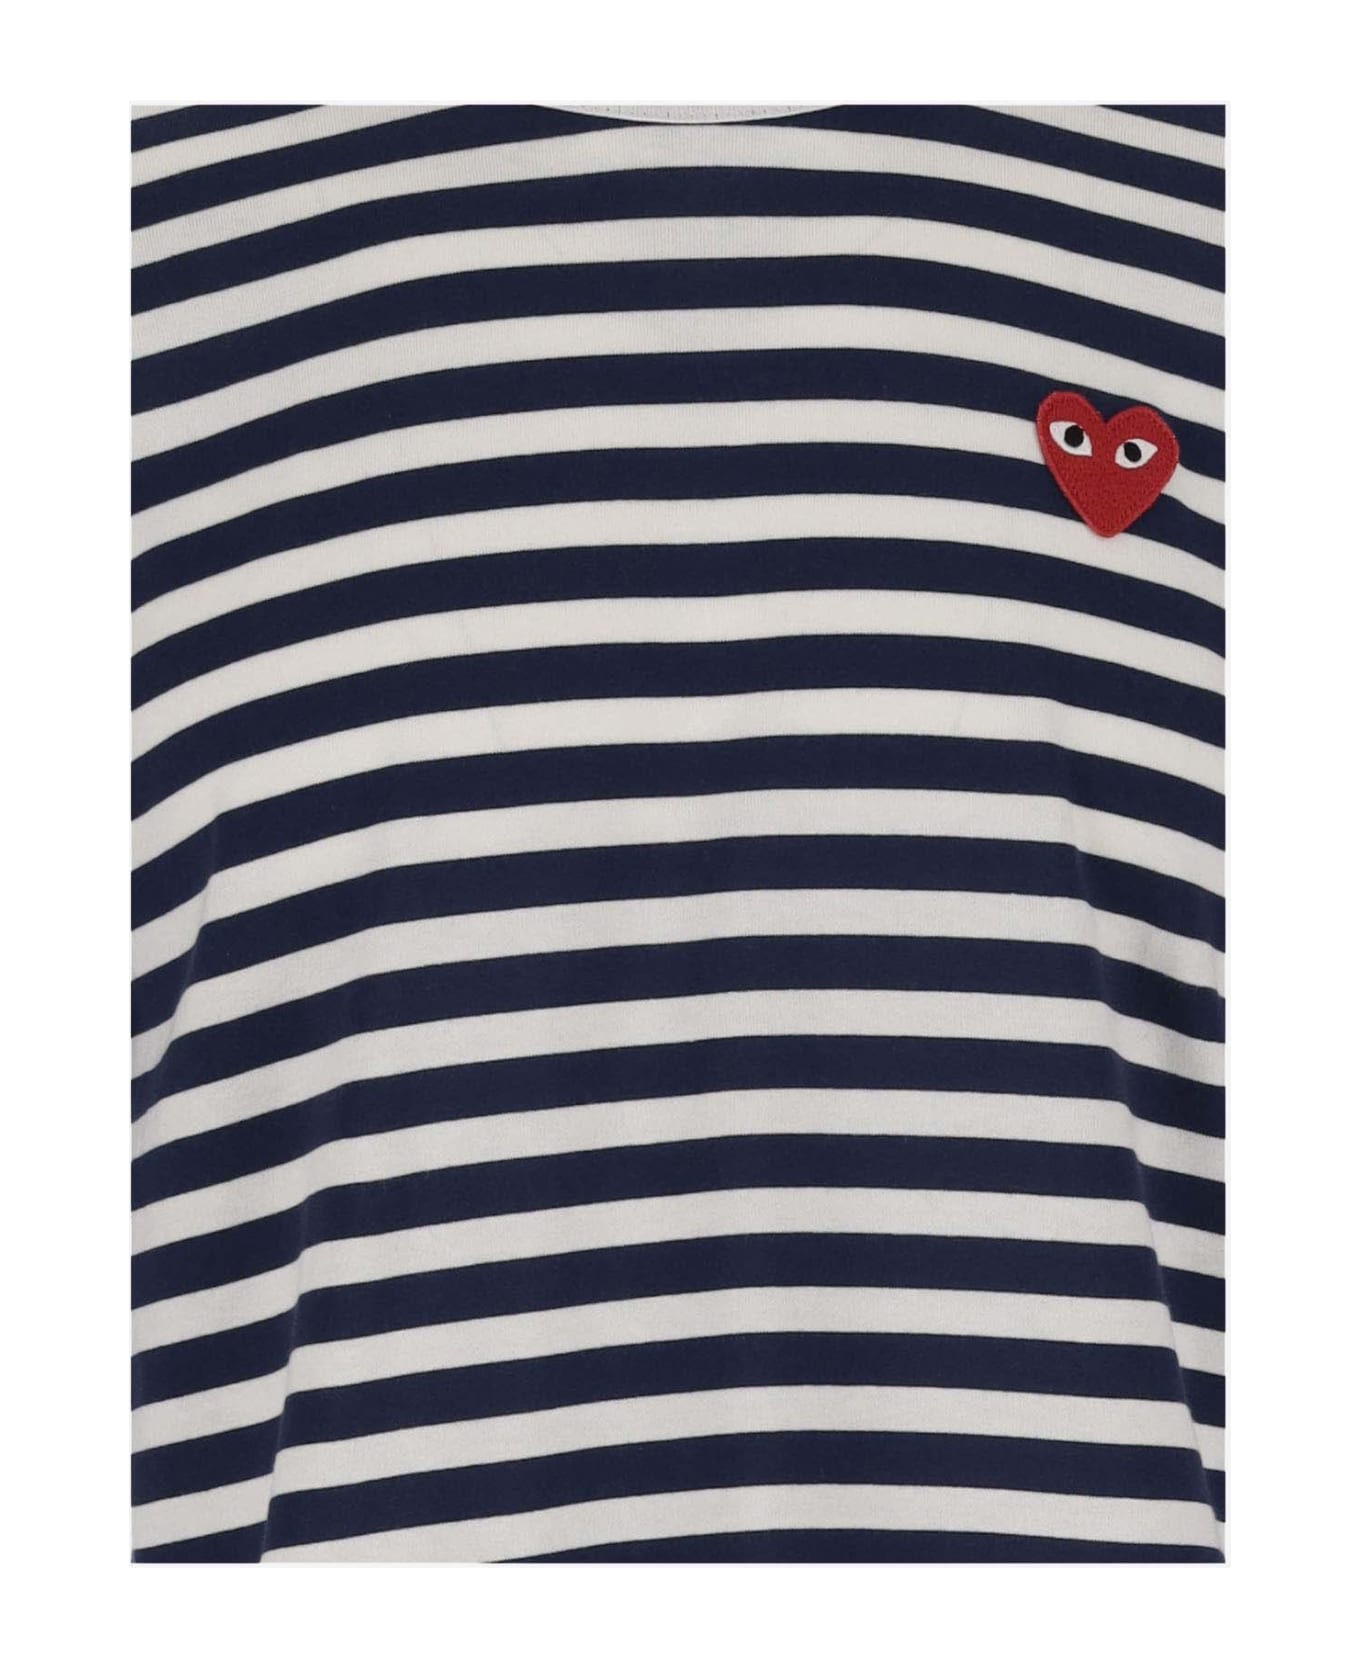 Comme des Garçons Long Sleeve T-shirt With Striped Pattern And Logo - Blue シャツ